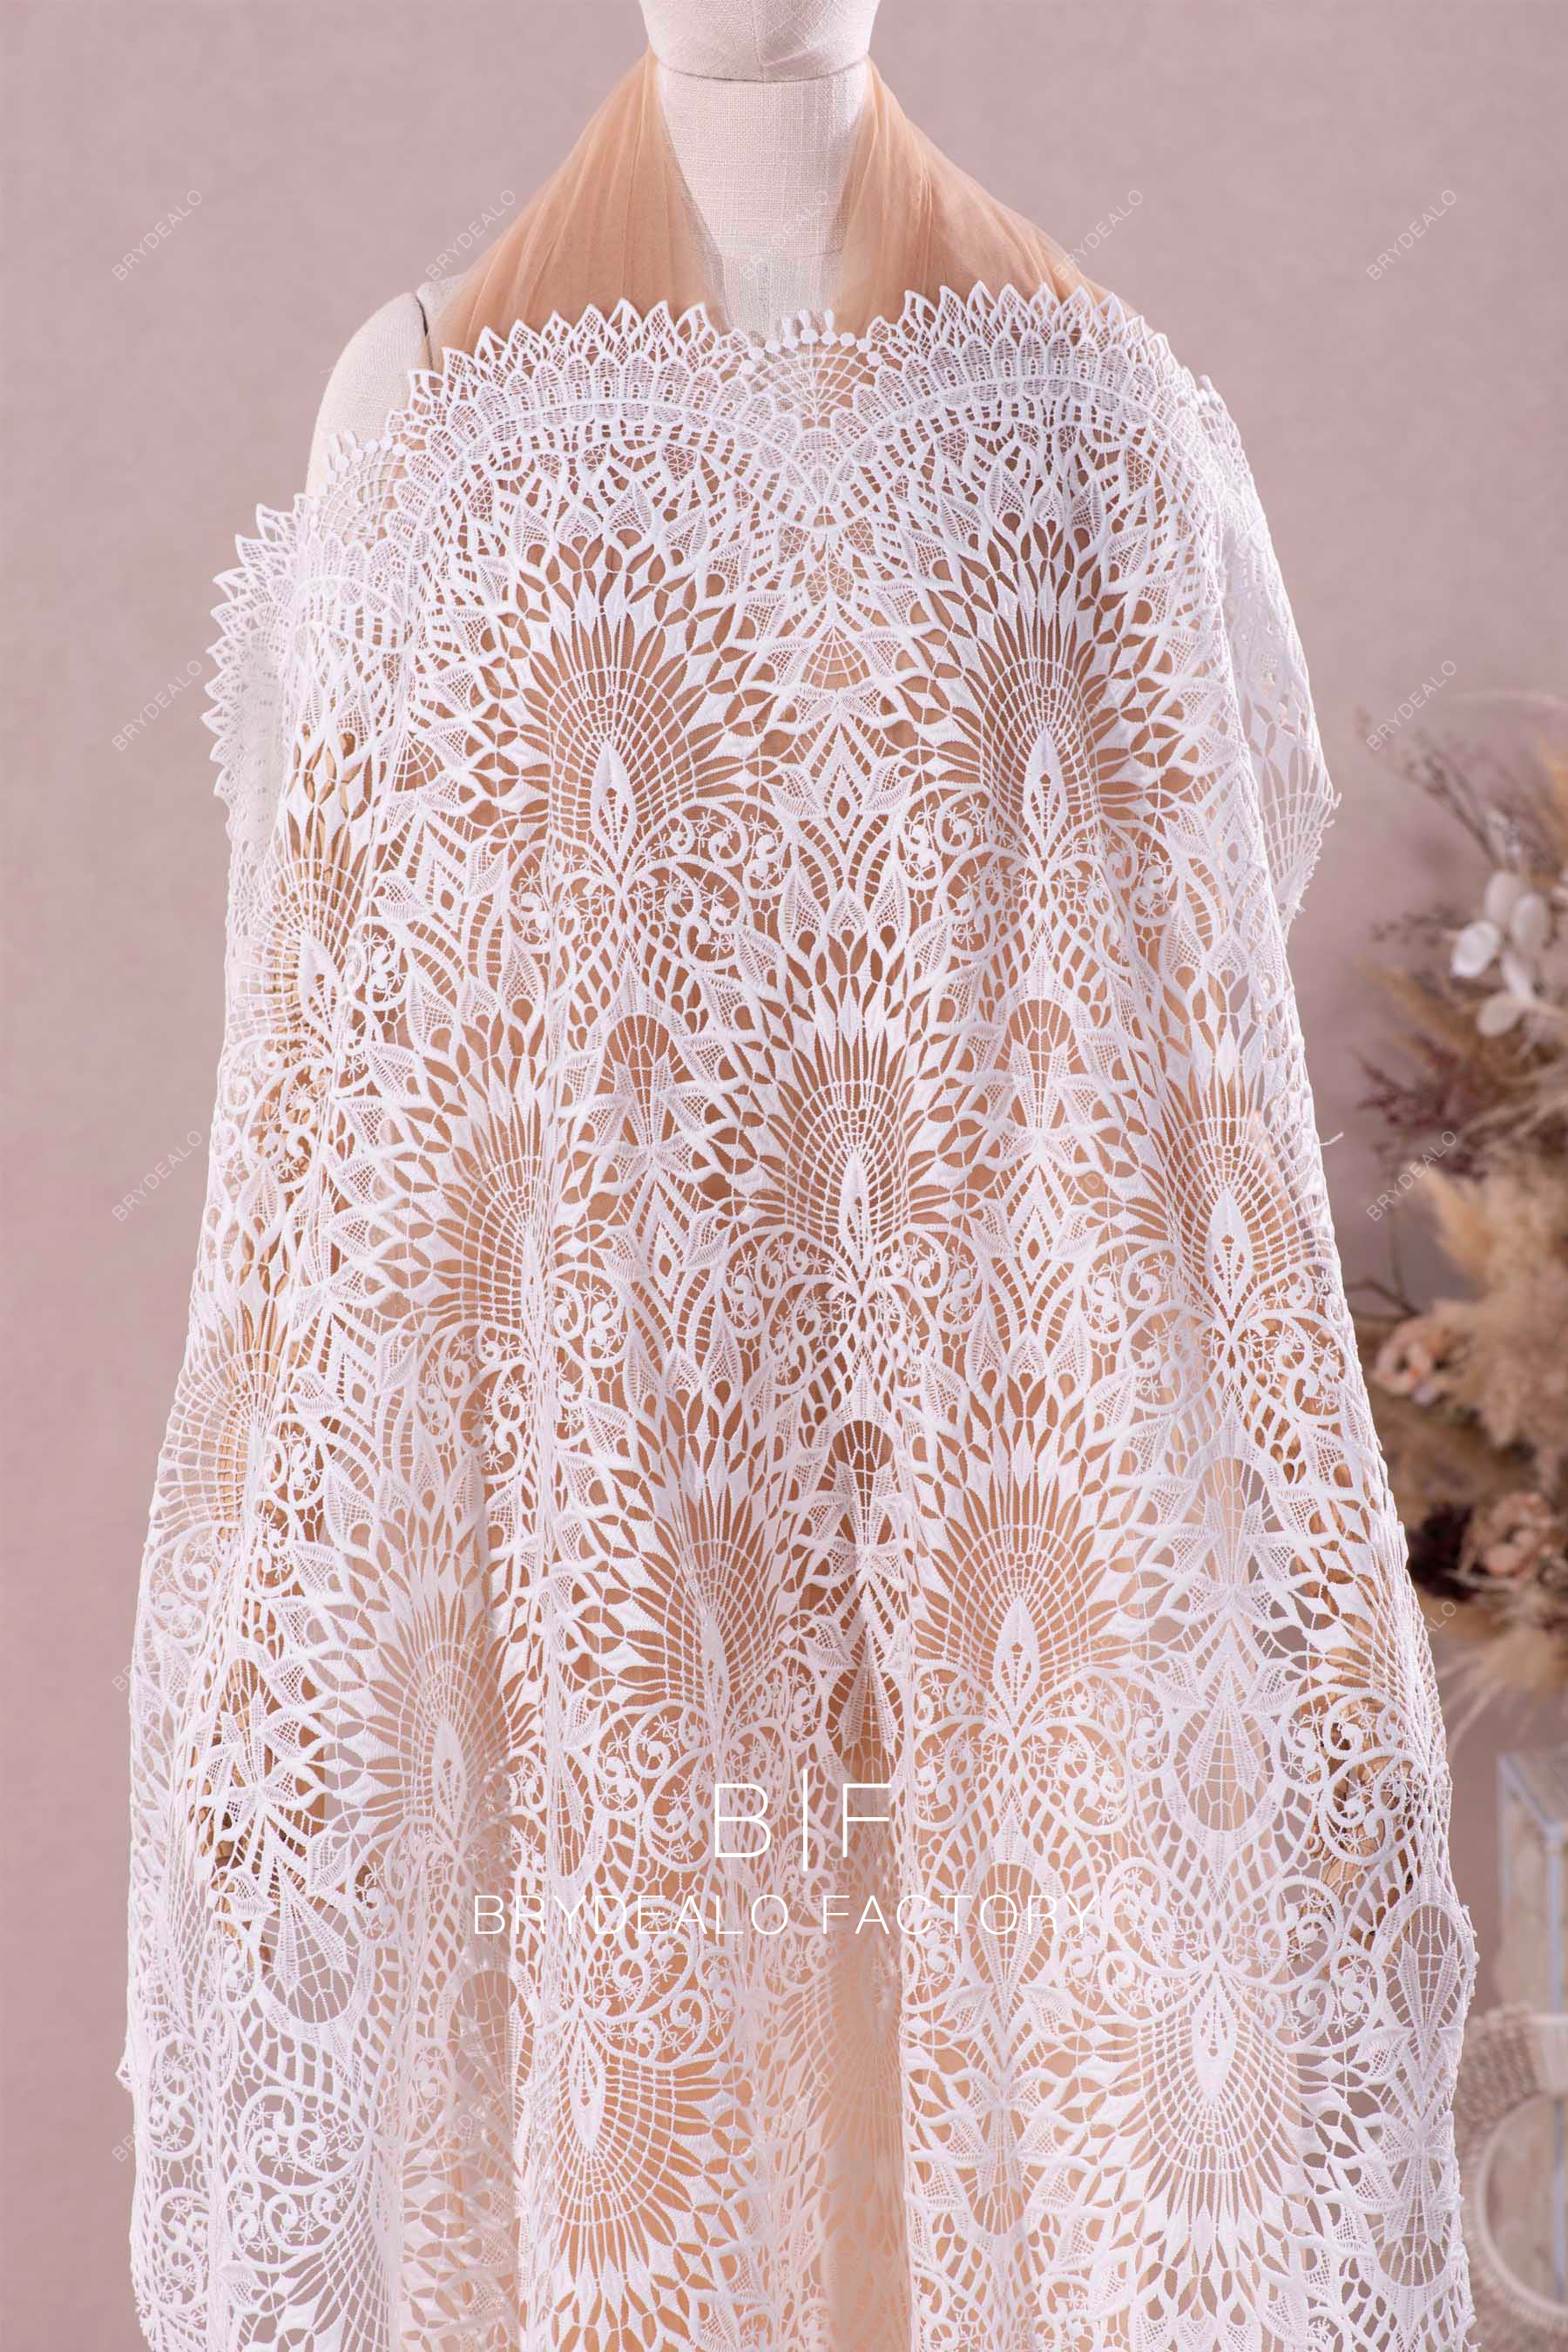 Scalloped Totem Crocheted Bridal Lace Fabric